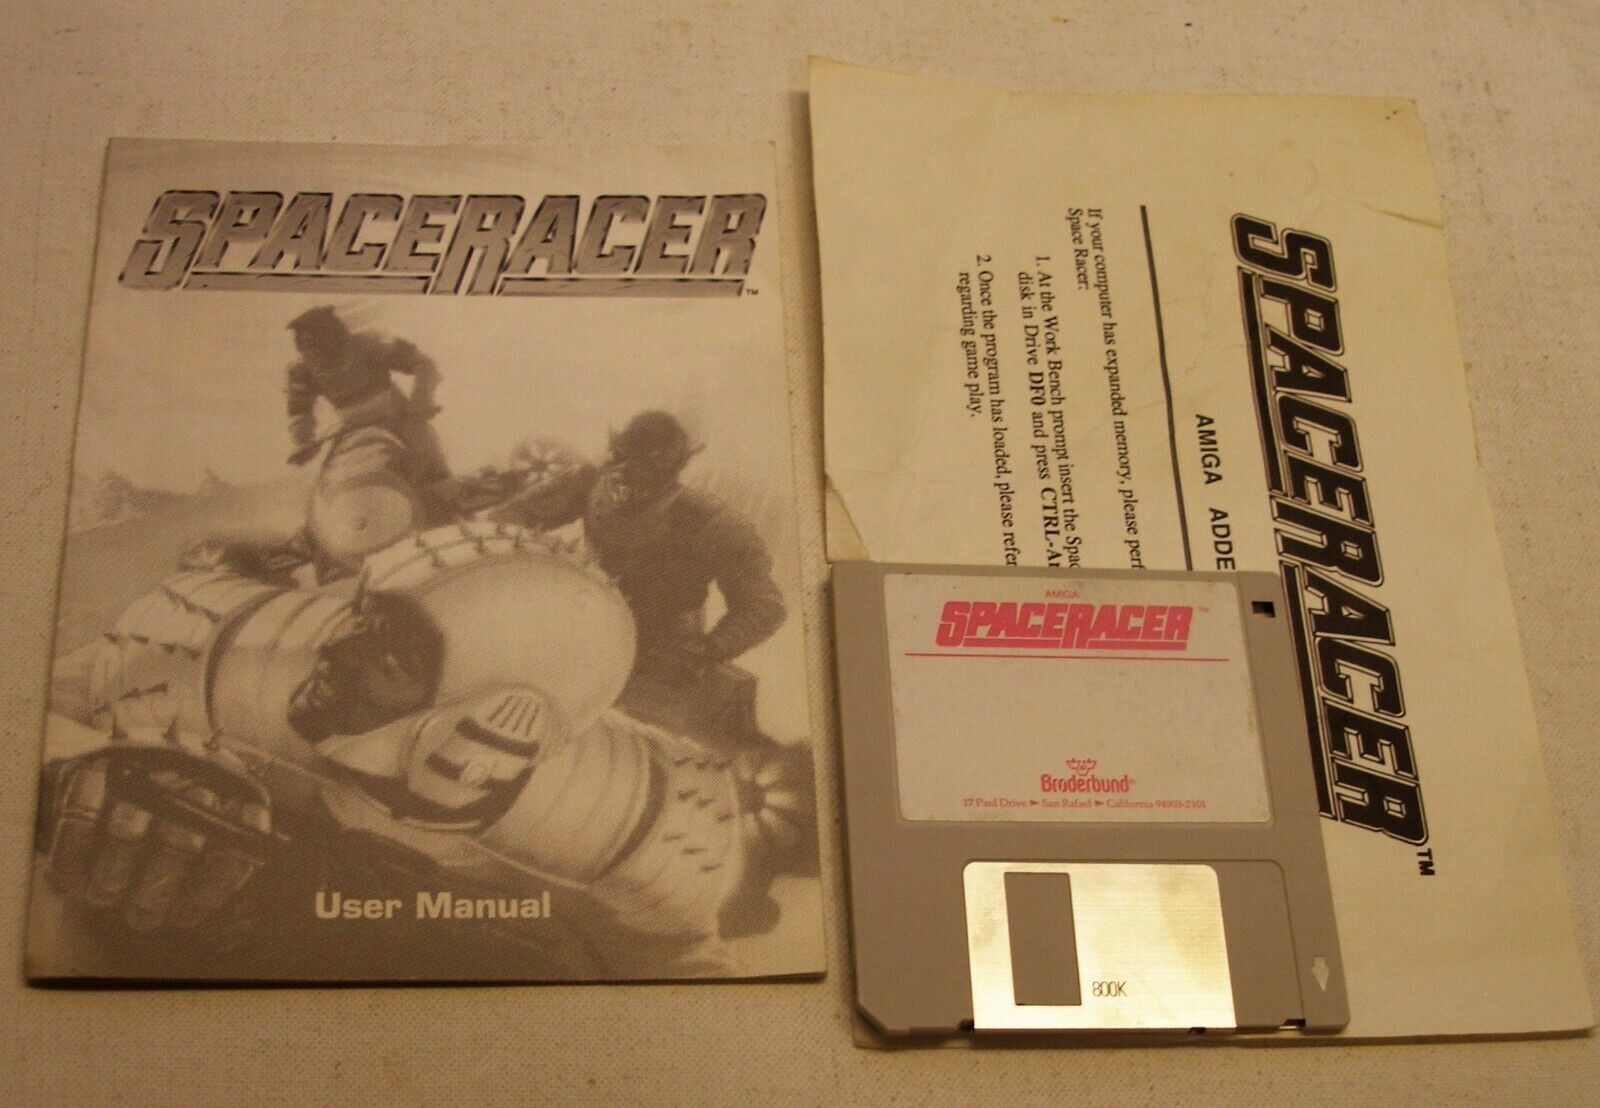 SpaceRacer by Broderbund, Disk and Manual, for Commodore Amiga